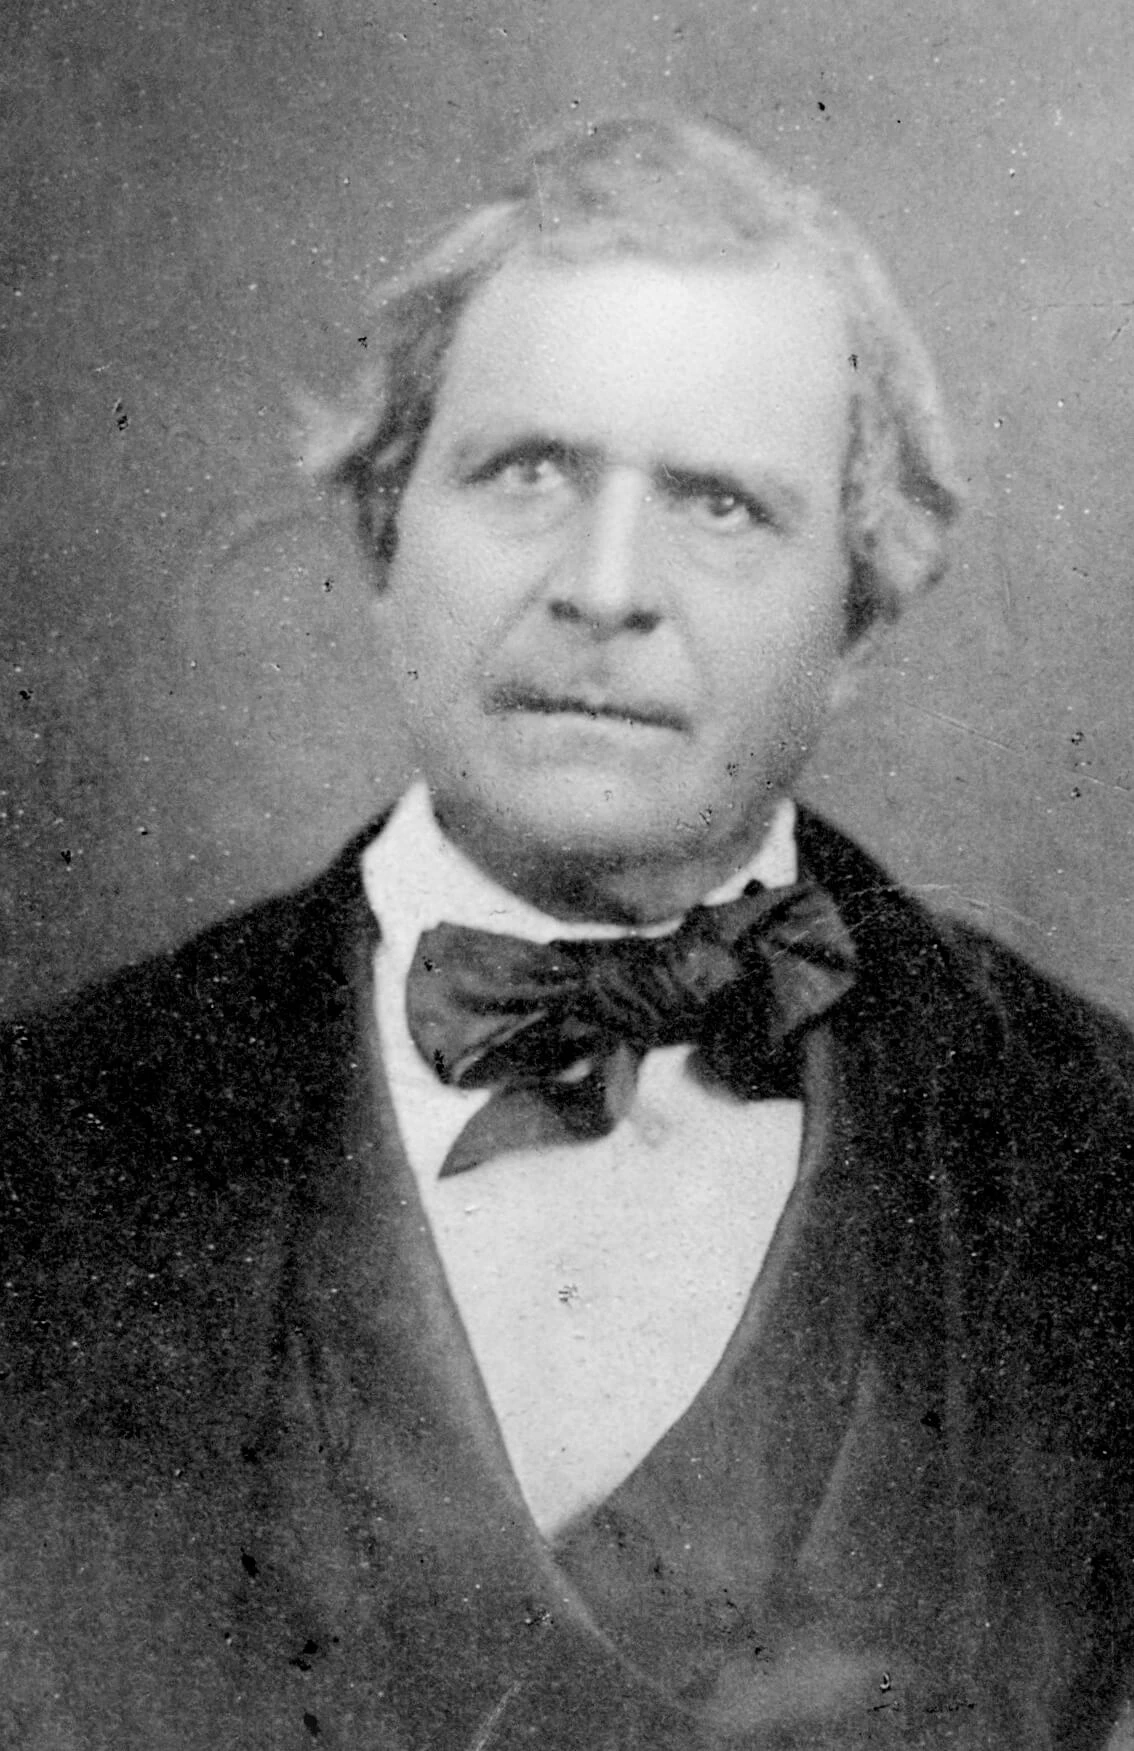 Black and white portrait of a middle-aged man with parted hair in a suit and bow tie.